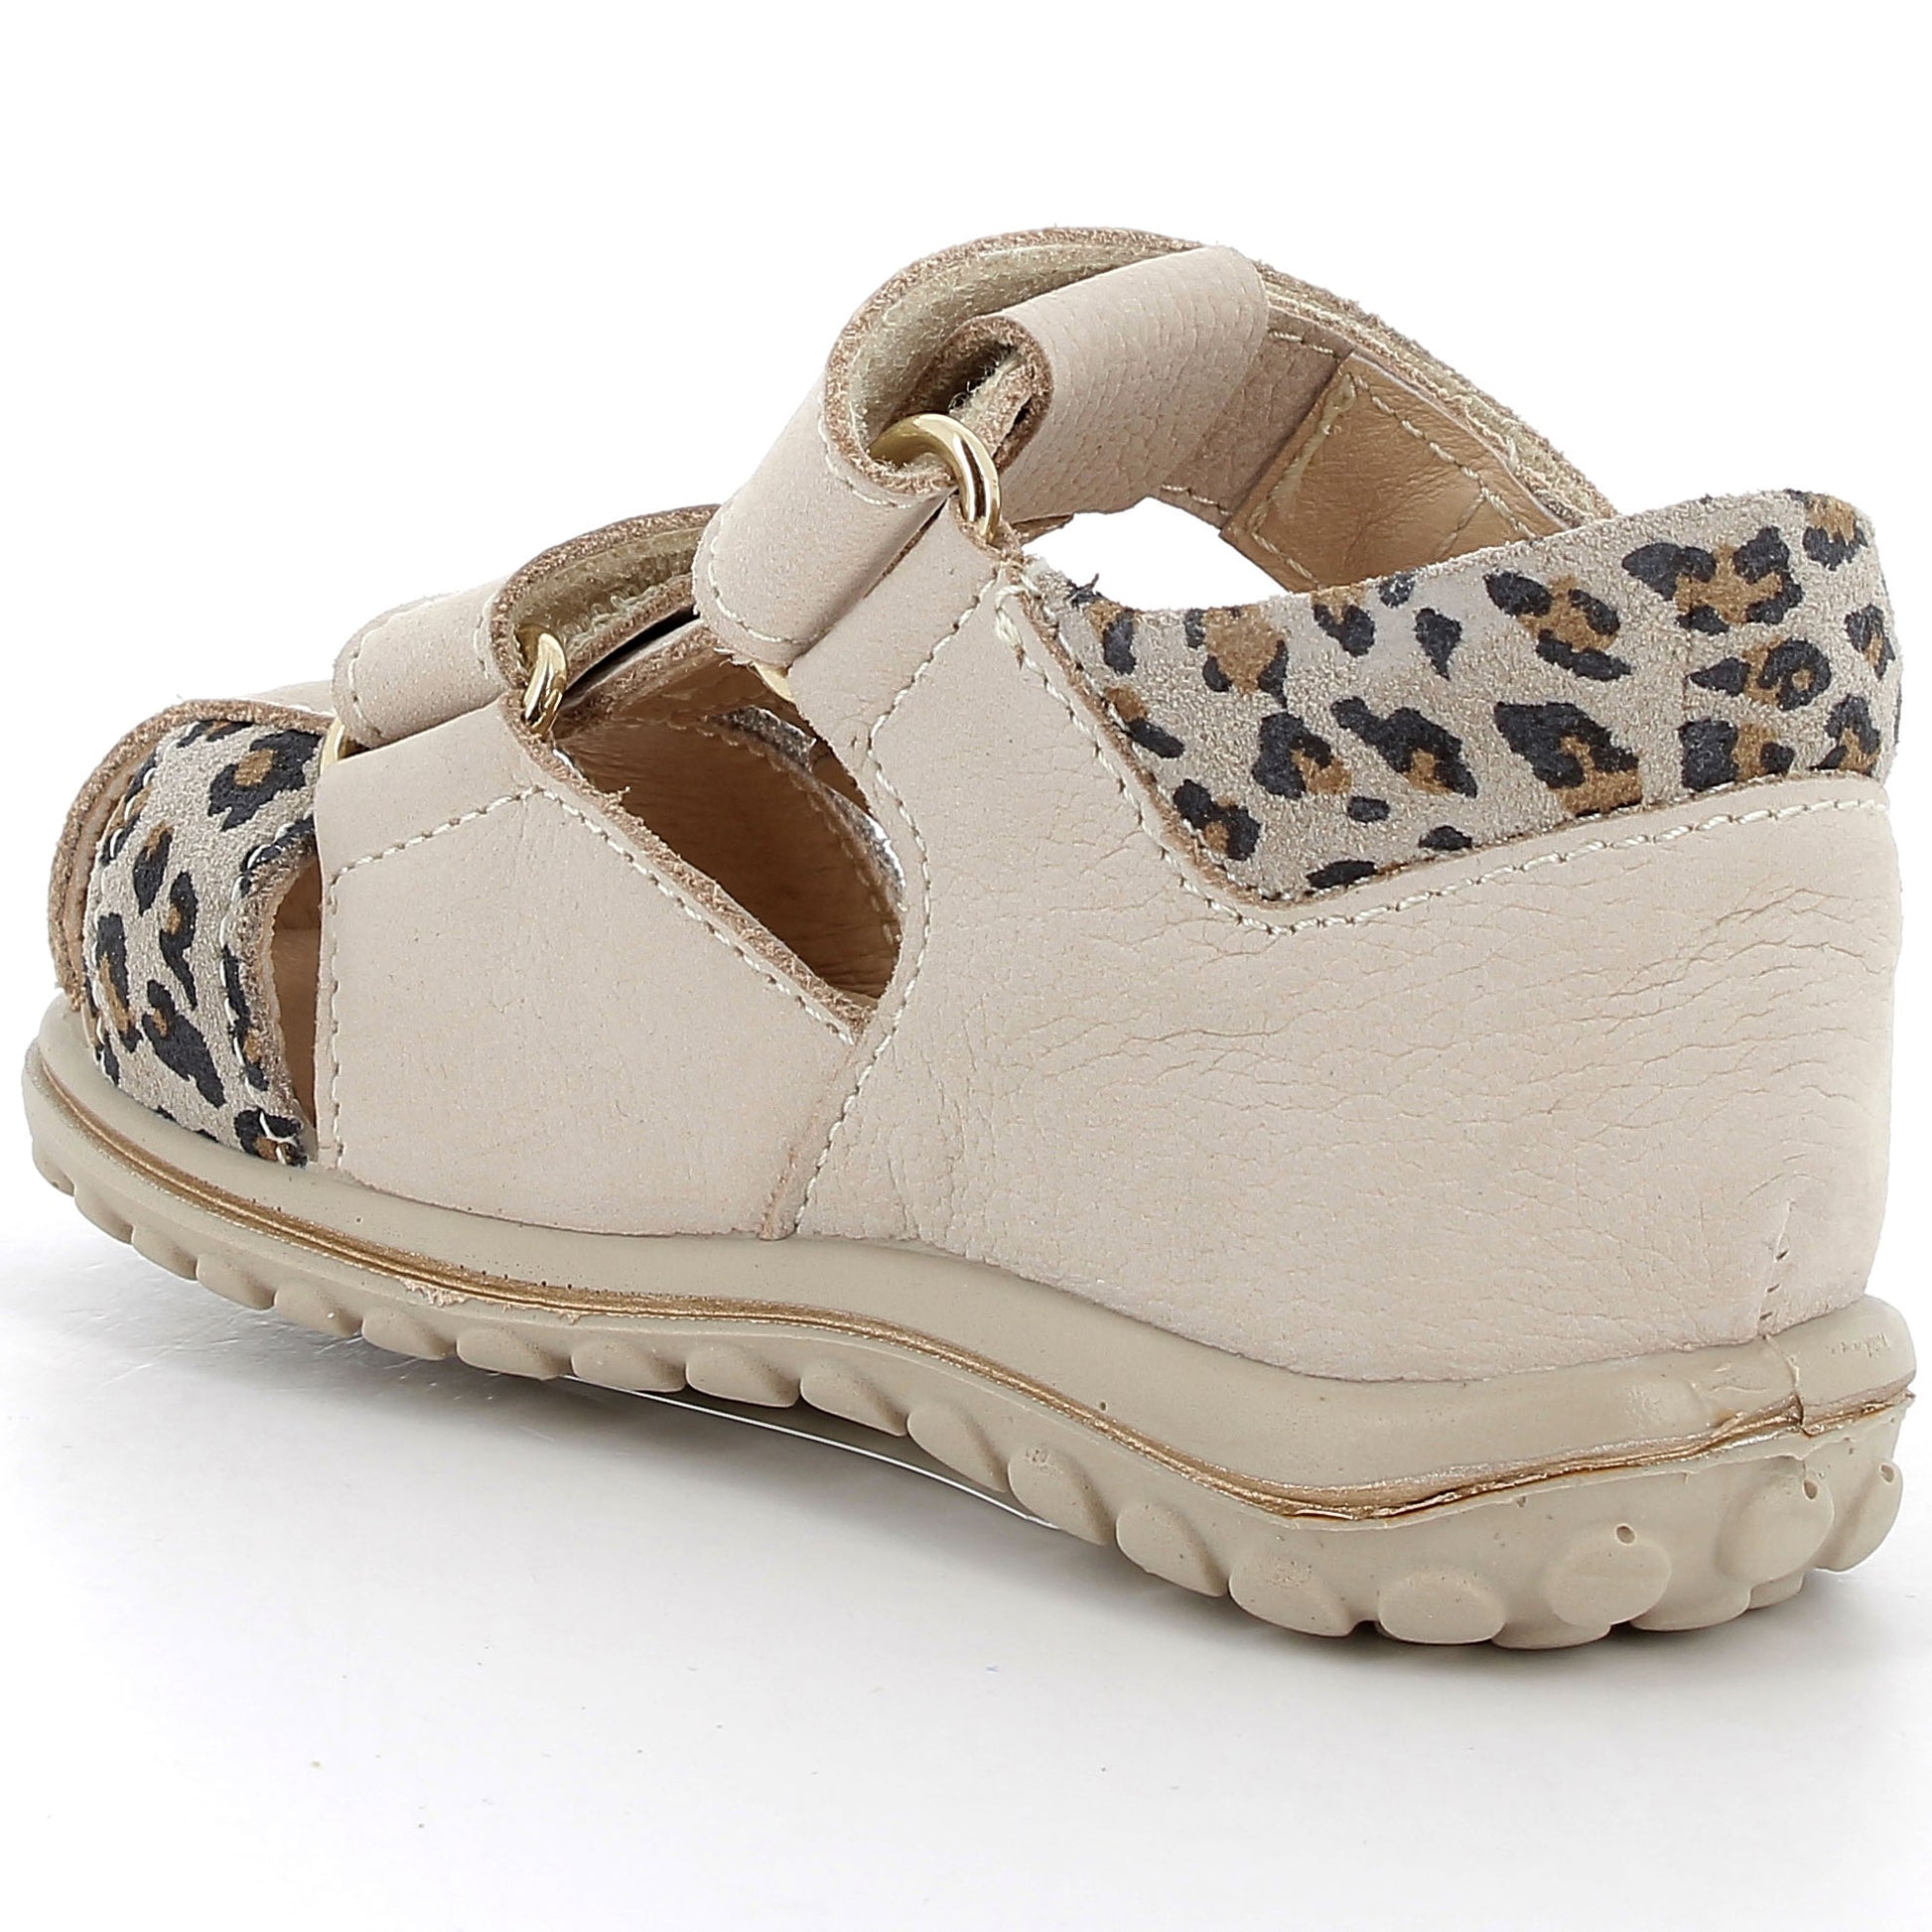 PRIMIGI Halbsandale BABY SWEET 58626-33 - beige / gold, comfortable and stylish baby sandals with a beige and gold color scheme